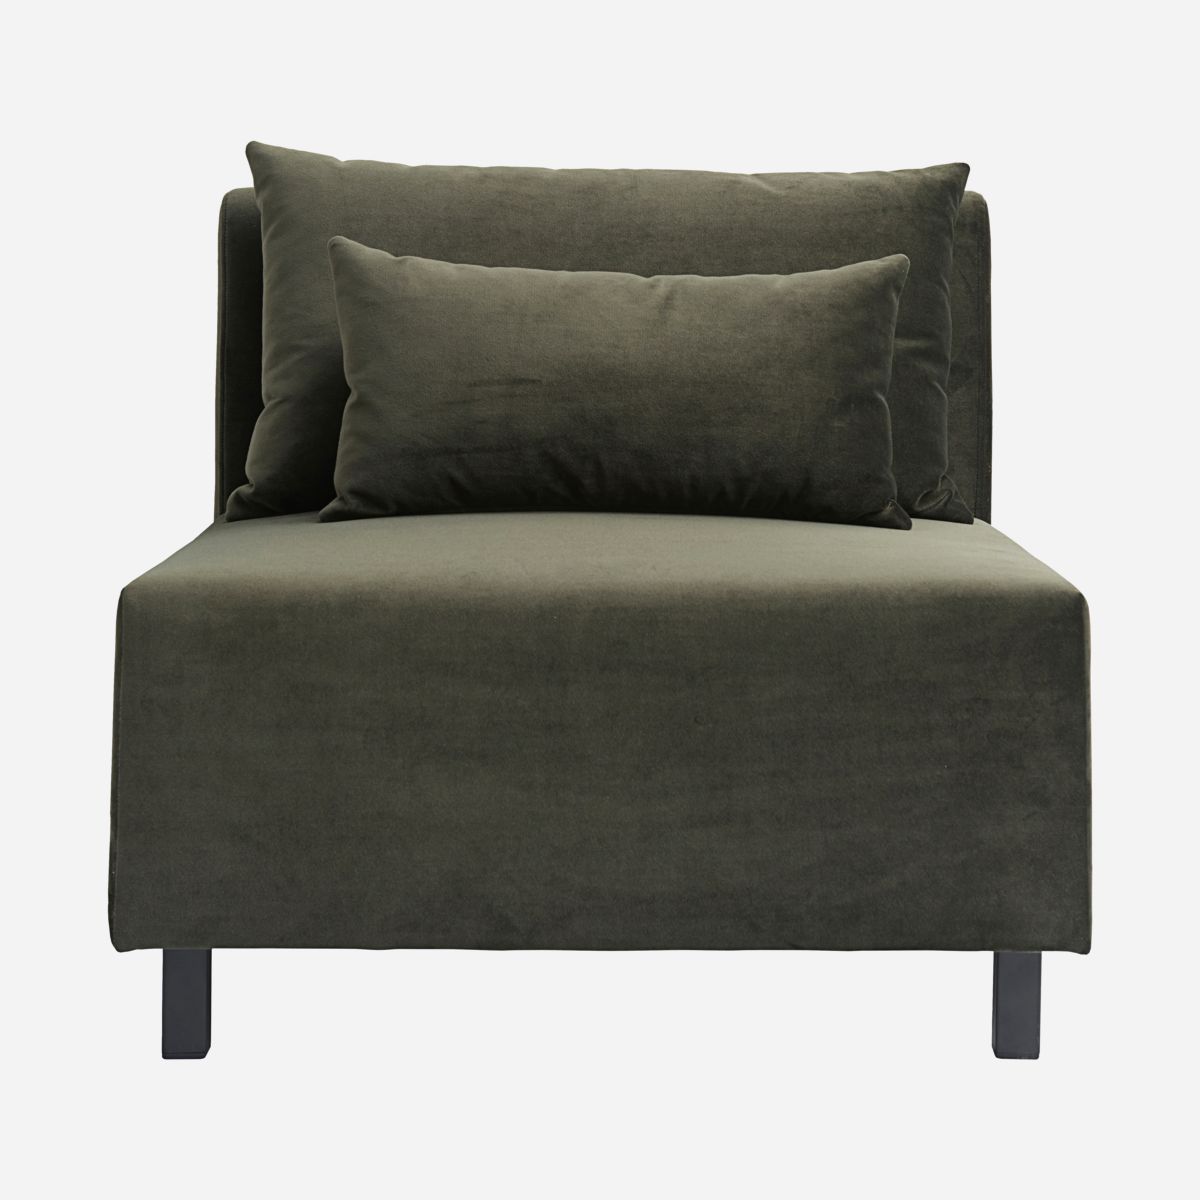 Sofa, Middle section, Slow, Green House Doctor